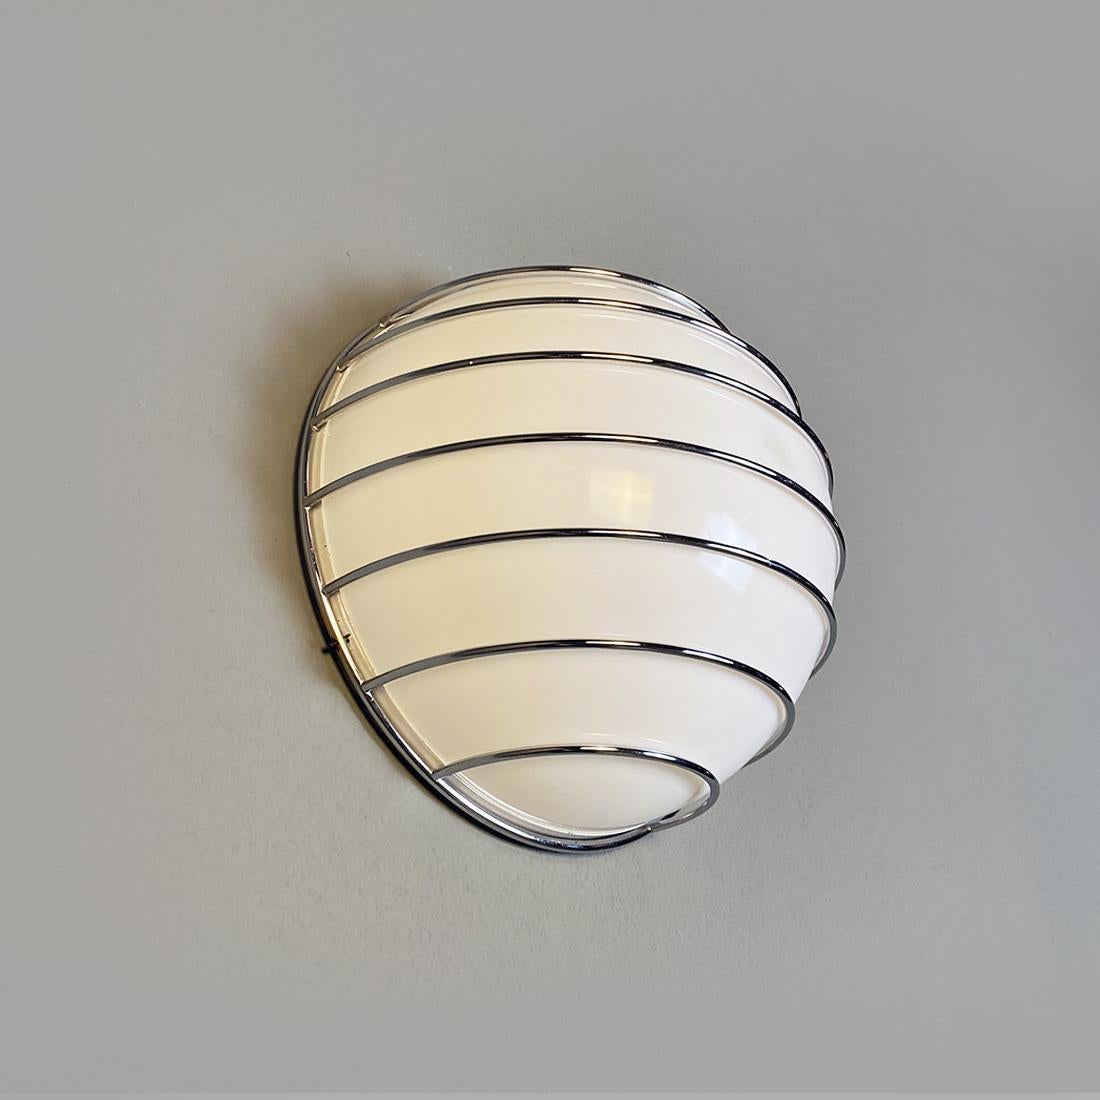 Italian Modern Metal Rod Structure and White Plastic Lampshade Wall Lamp, 1970s For Sale 2